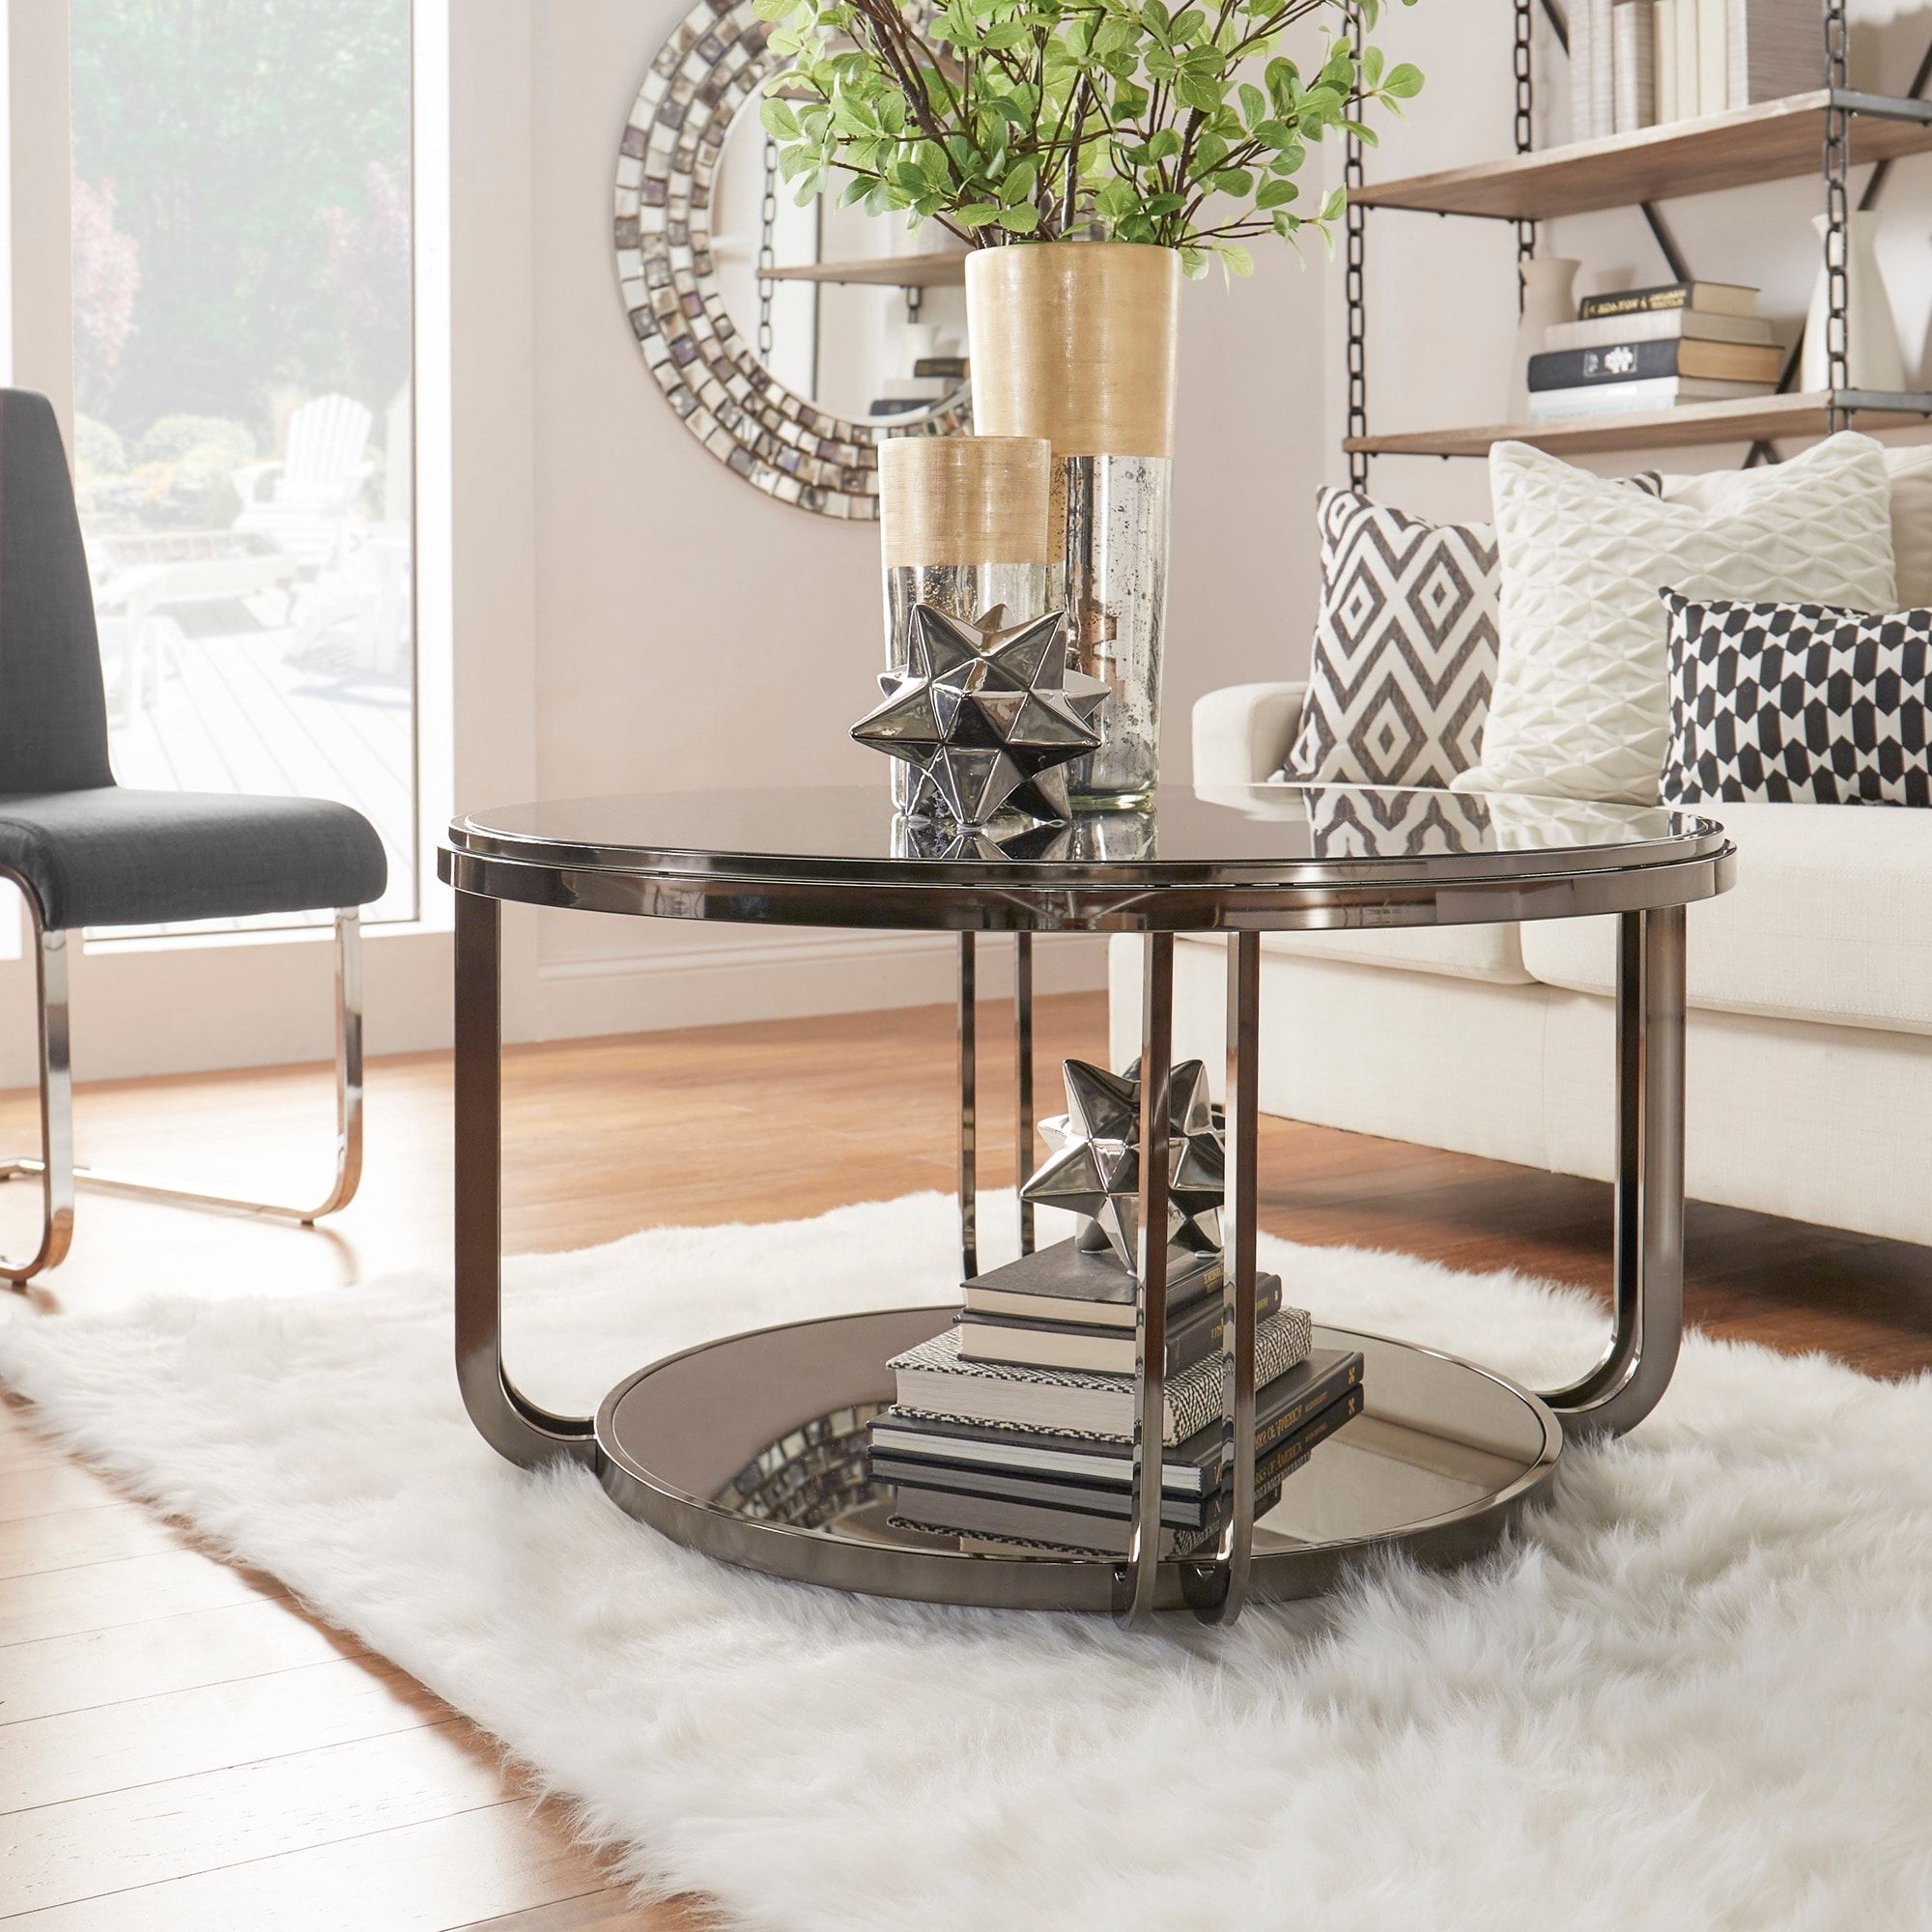 Black Coffee Tables In Well Known Shop Edison Black Nickel Plated Castered Modern Round Coffee Table (View 3 of 10)